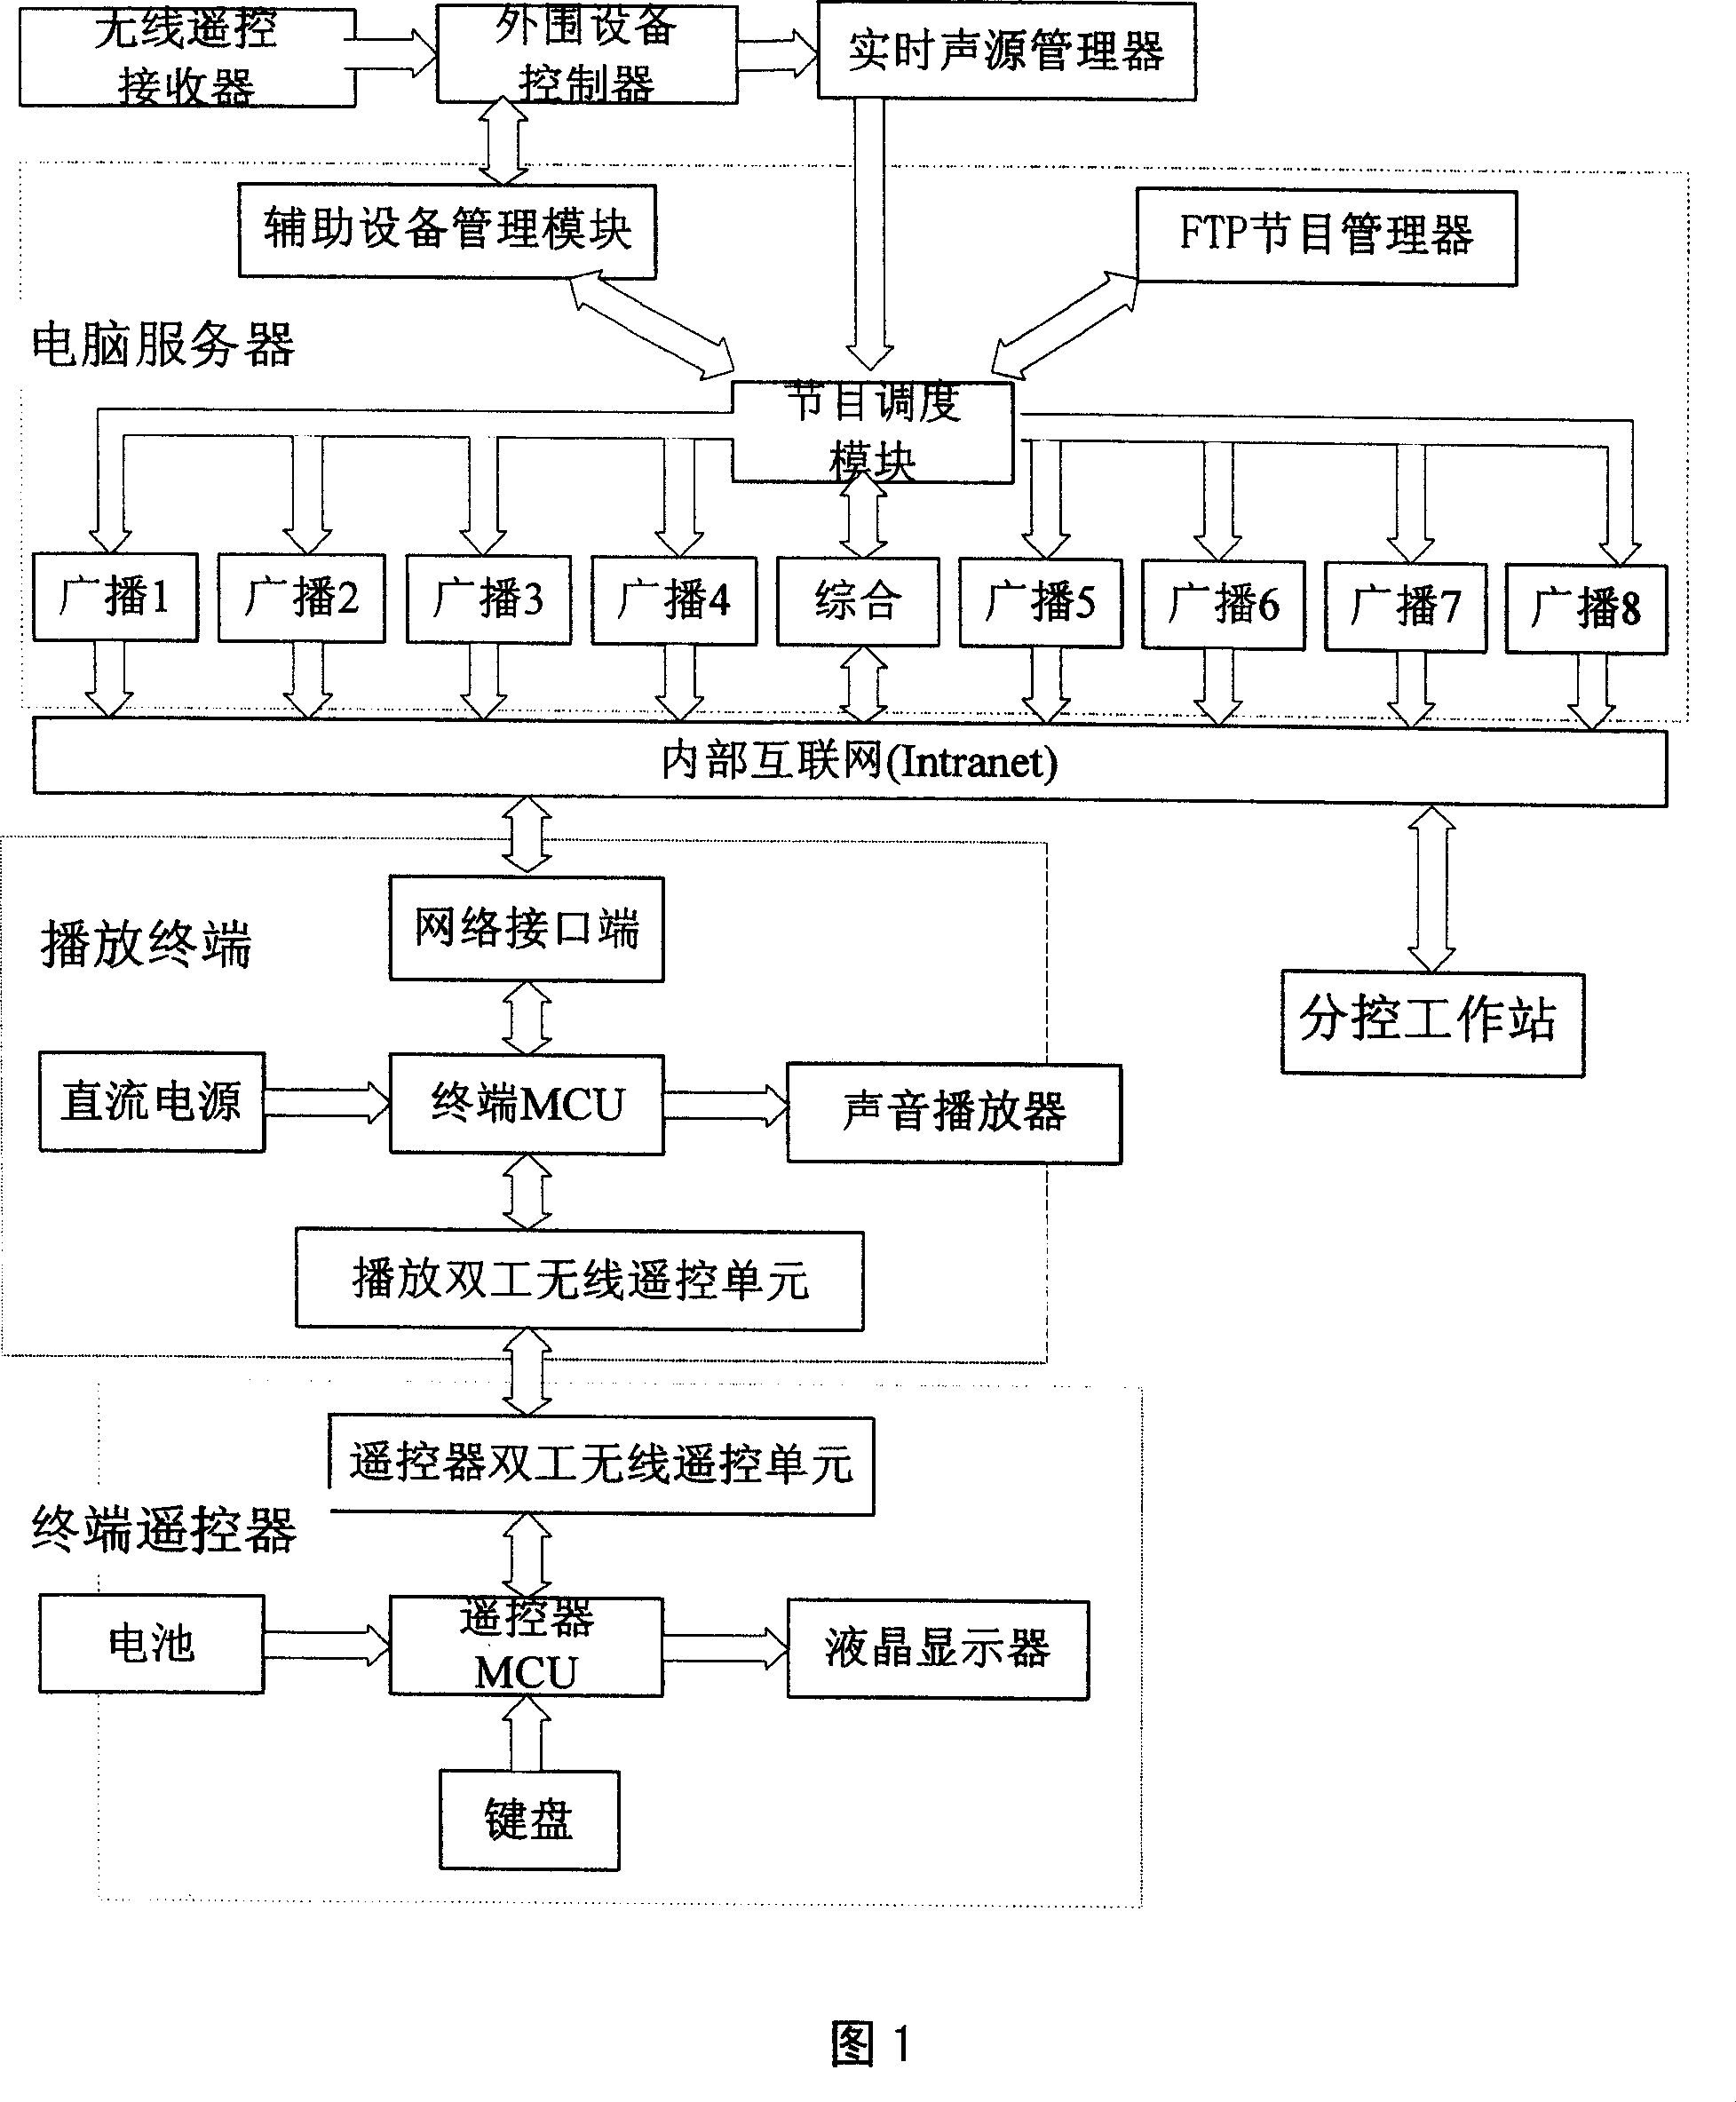 Interactive network voice broadcasting system